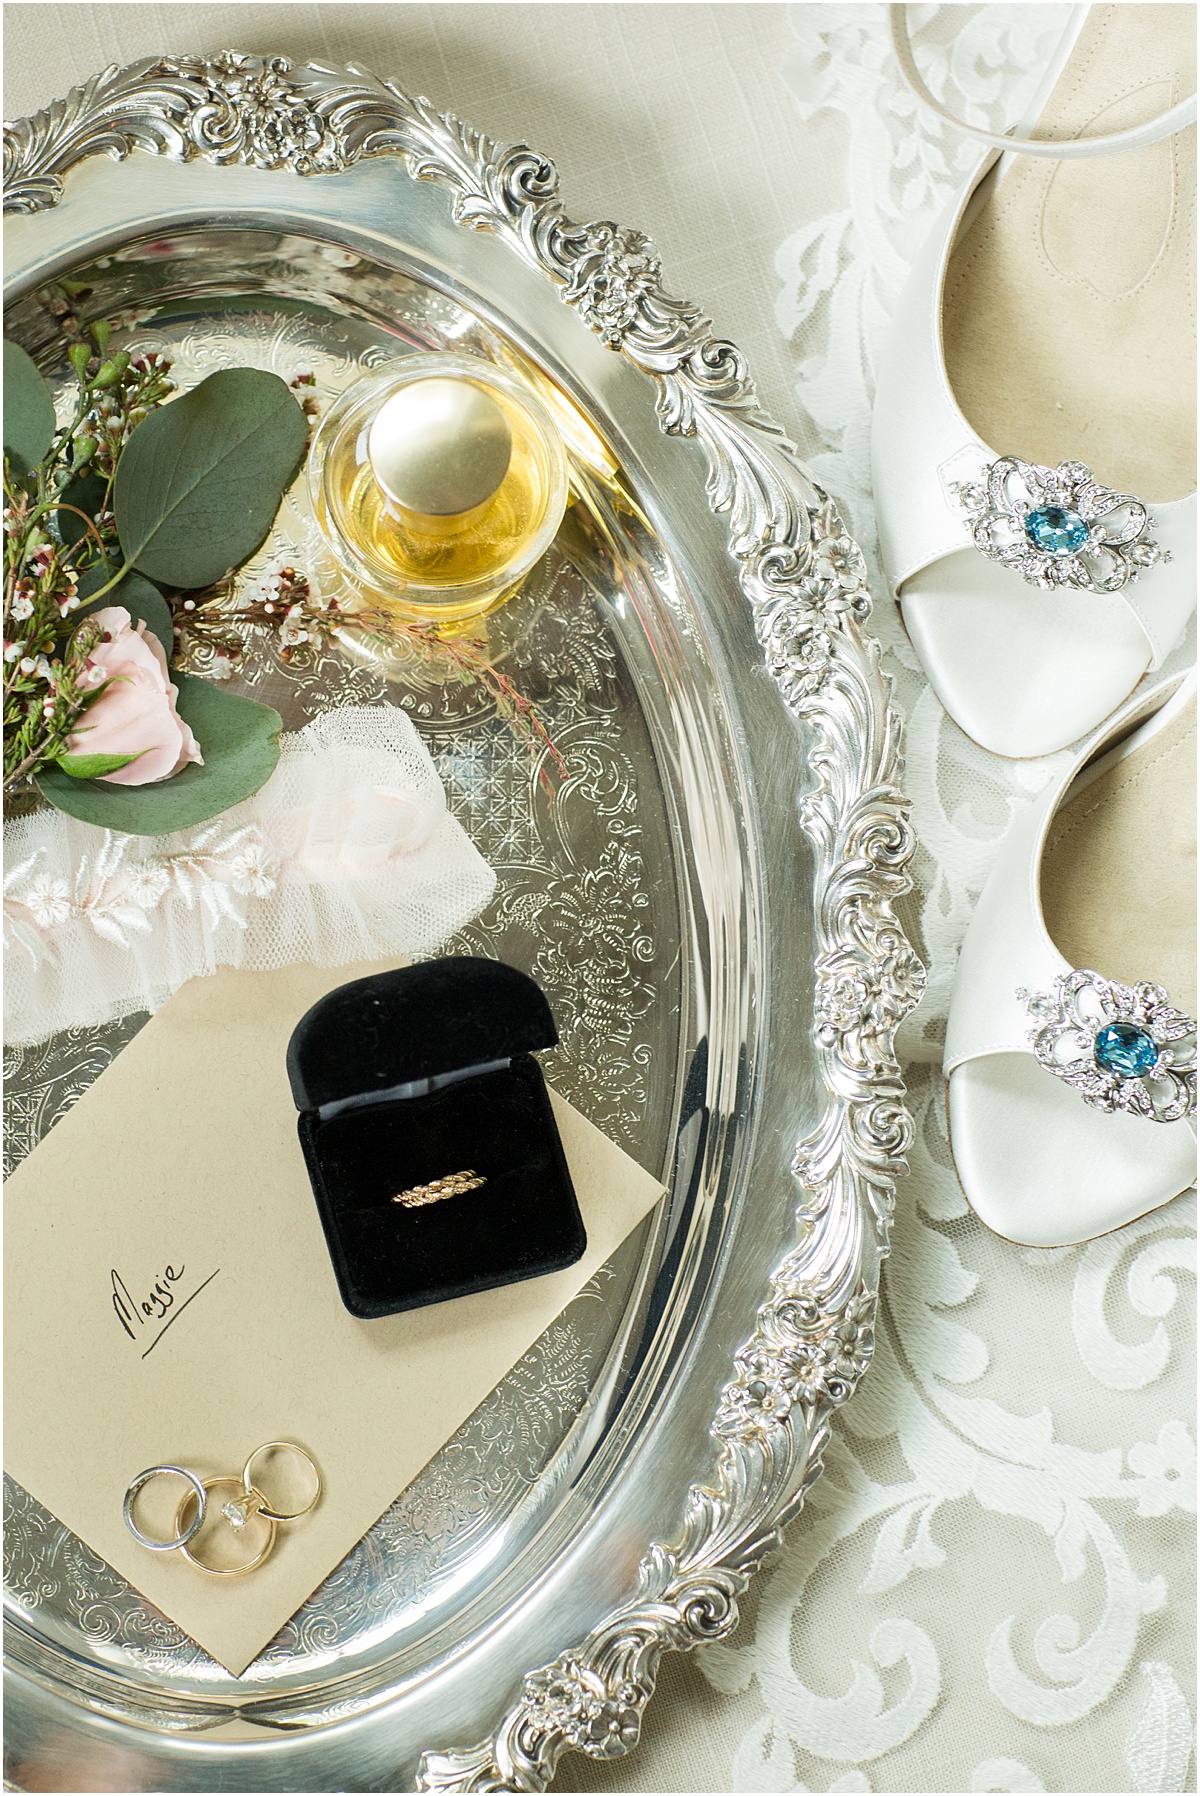 Vintage tray filled with a boutonniere, perfume bottle, ring box, rings and handwritten letter.